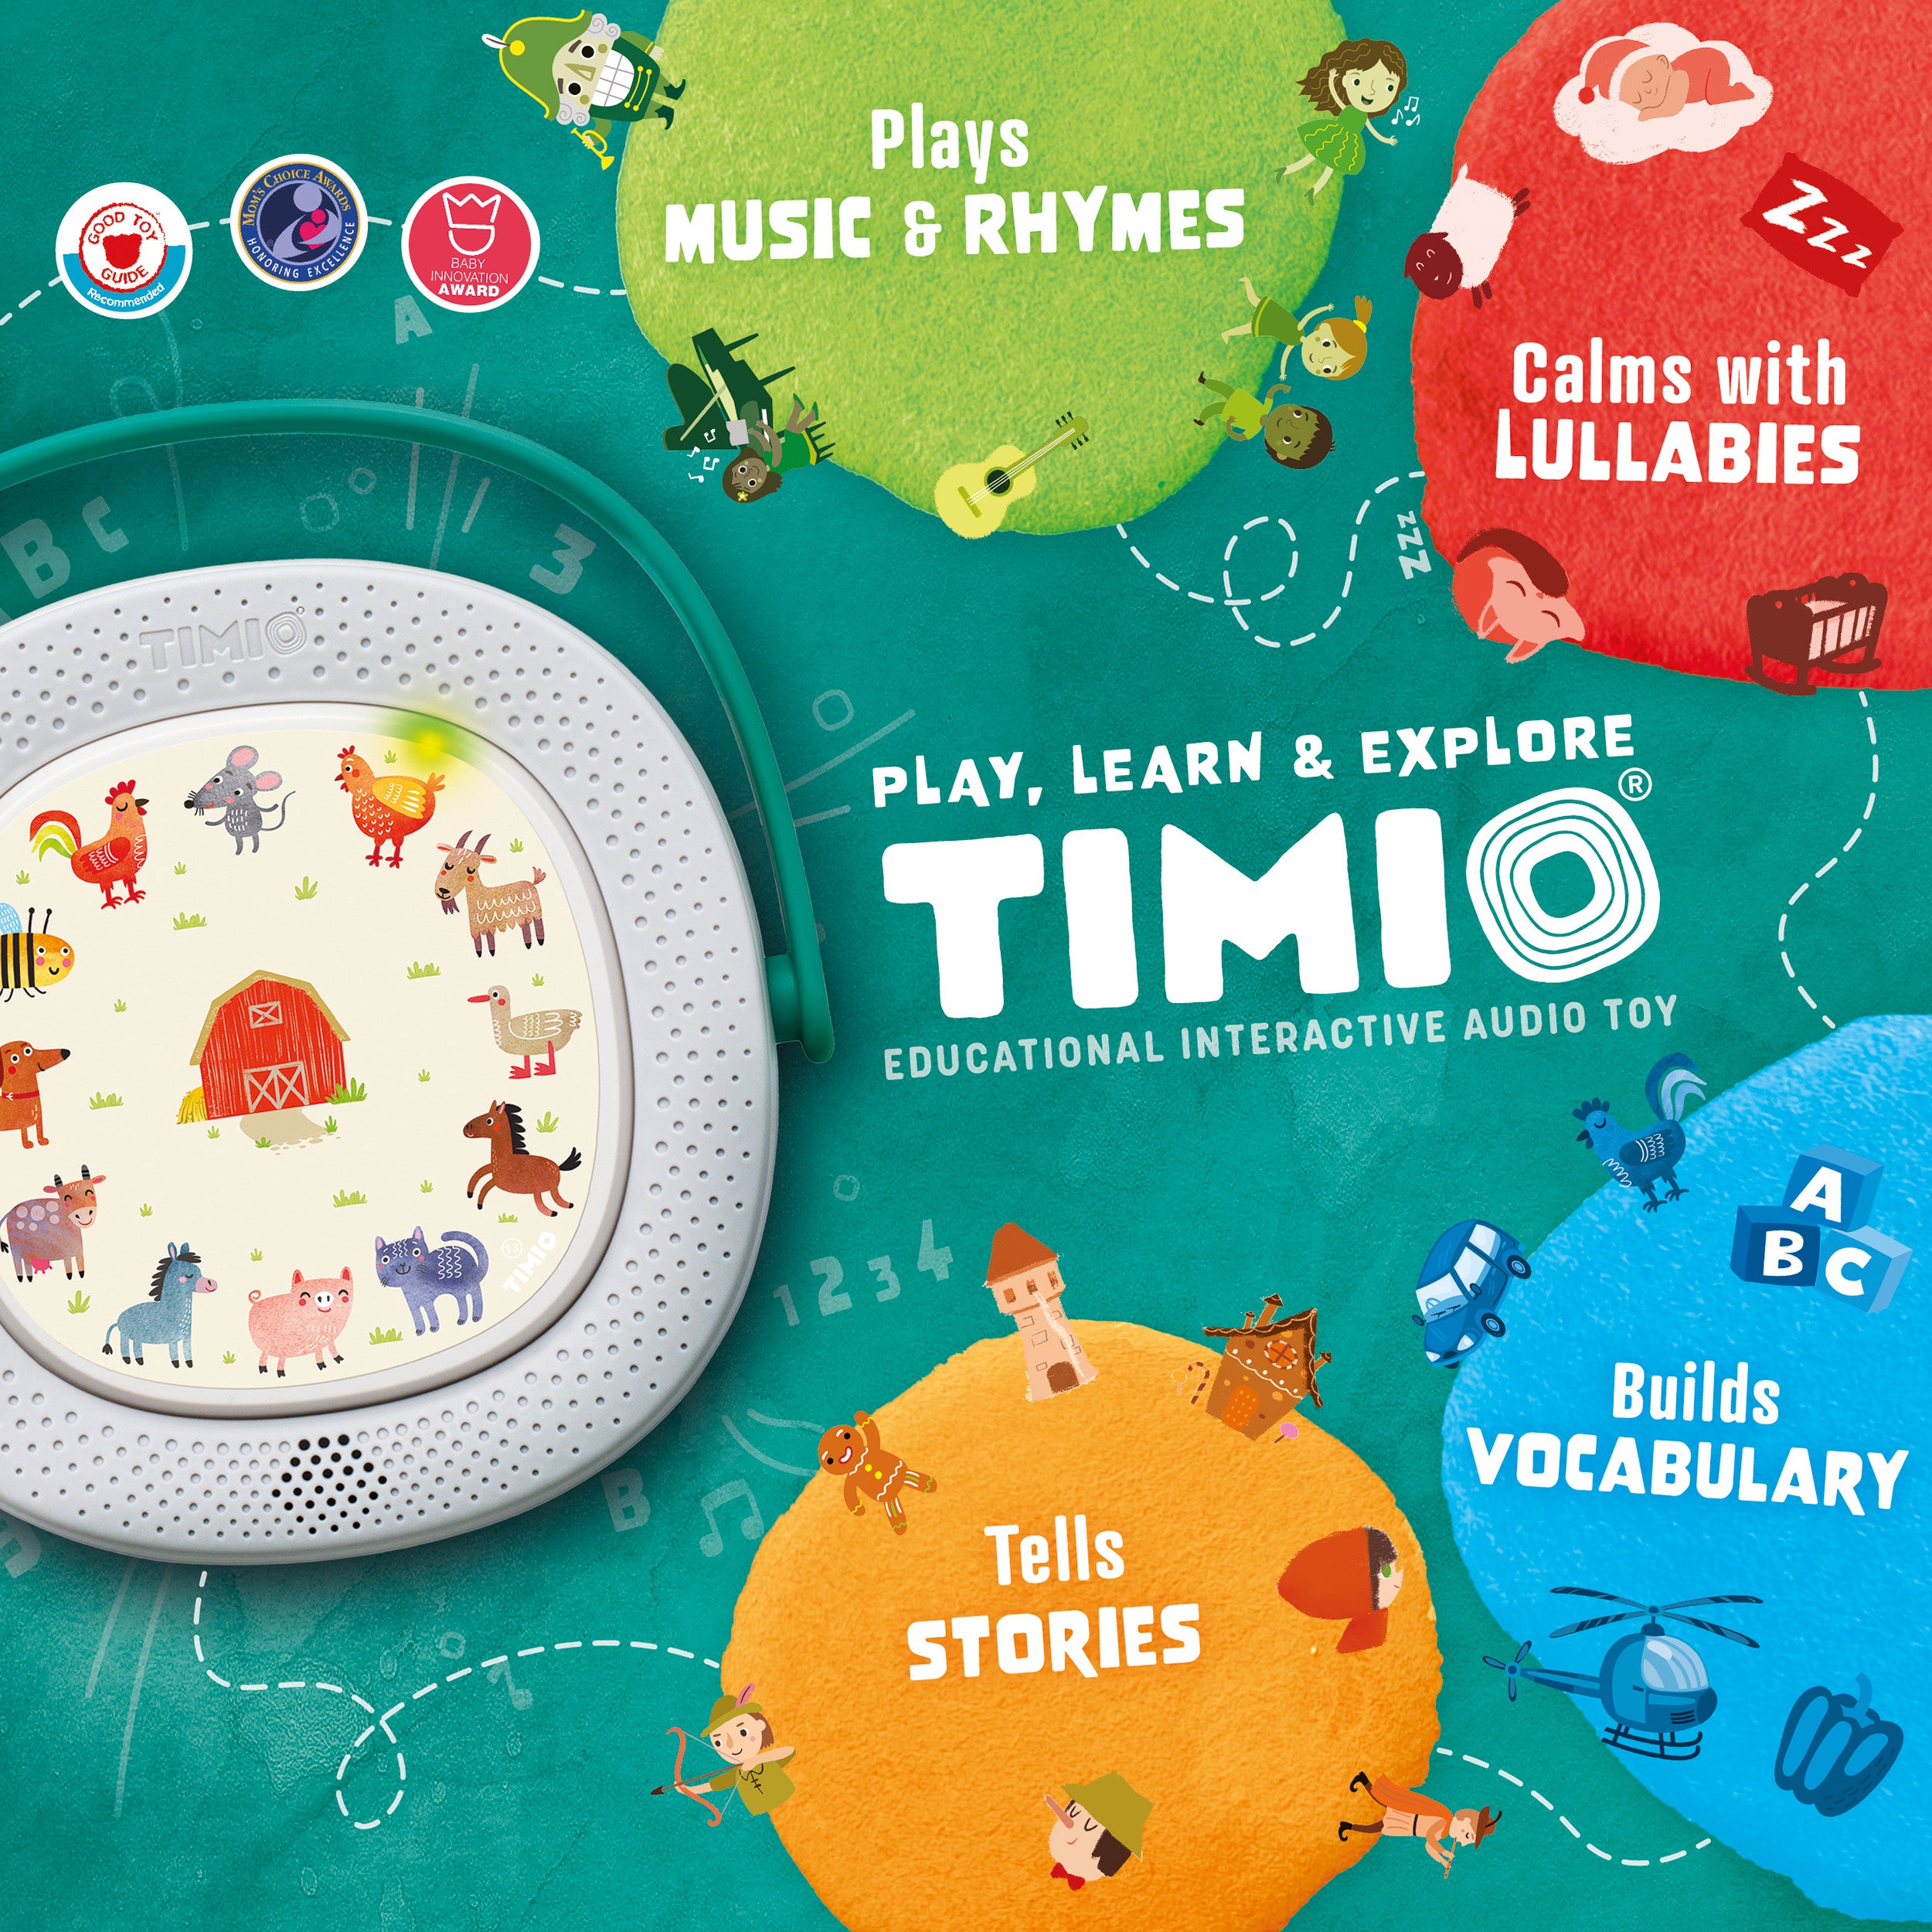 Order the Timio Disc Christmas Songs online - Baby Plus